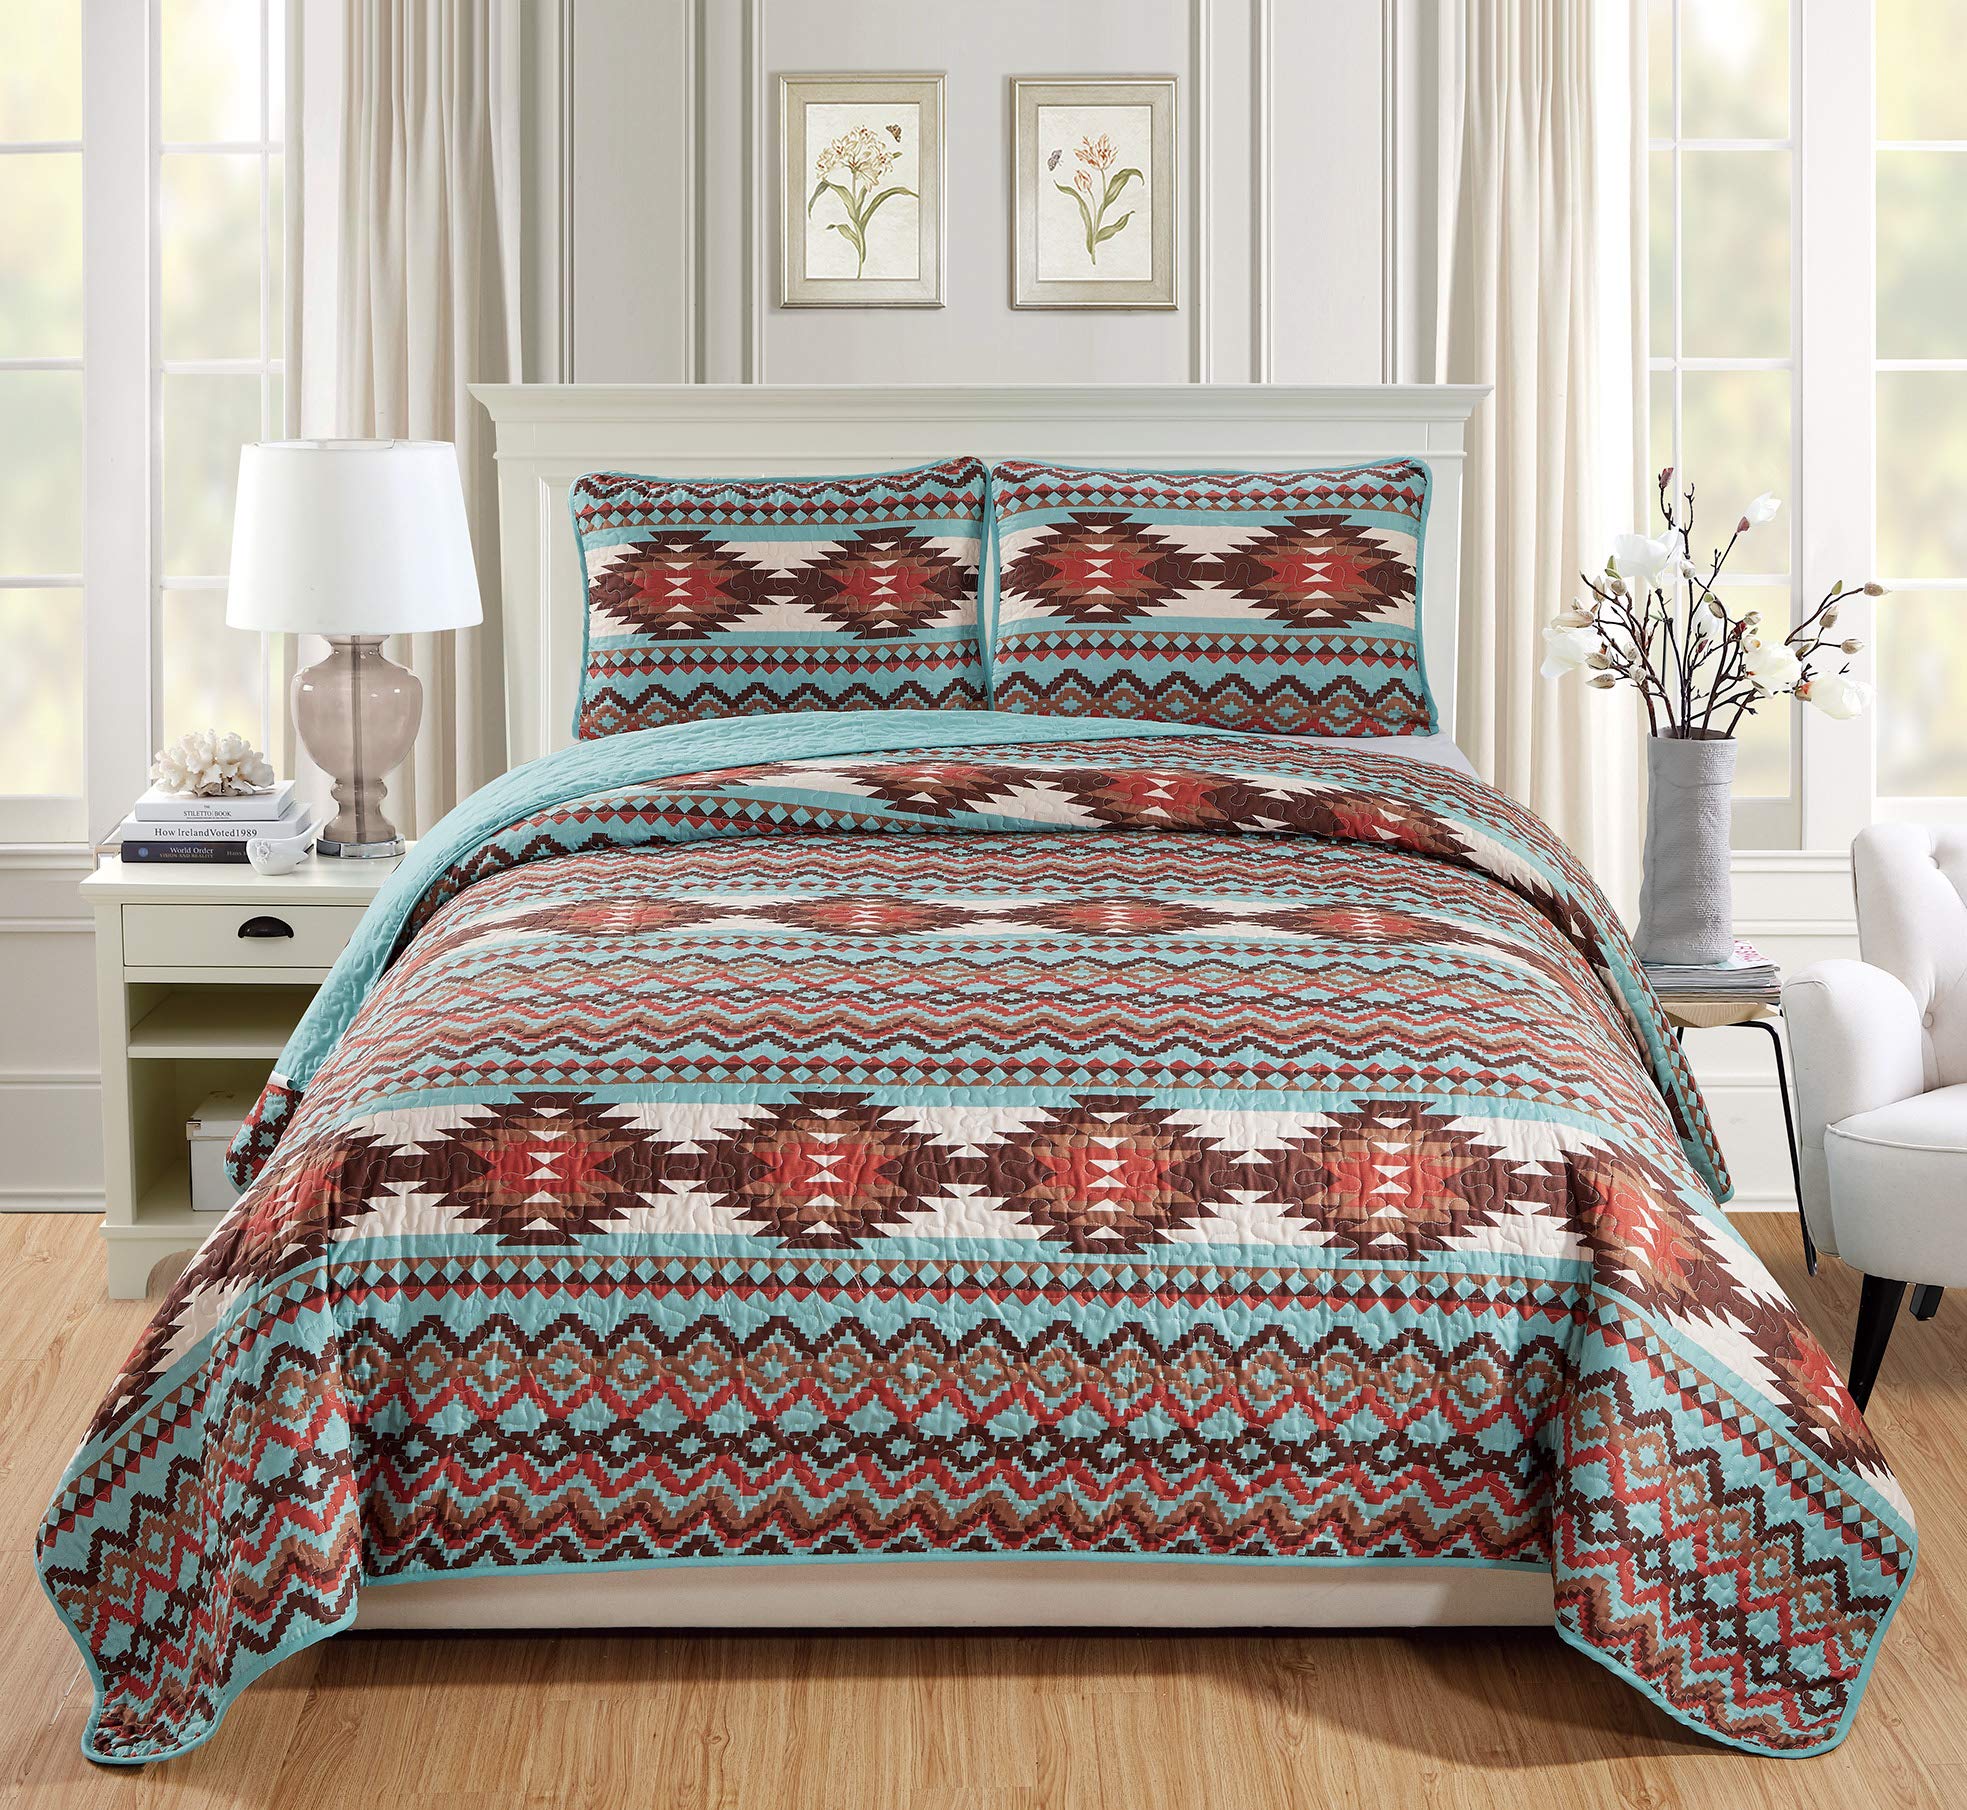 Book Cover Rugs 4 Less Rustic Southwestern Quilt Stitched Western Bedspread Bedding Set with Tribal Native American Patterns - Utah (Turquoise, King - California King) Turquoise King - California King